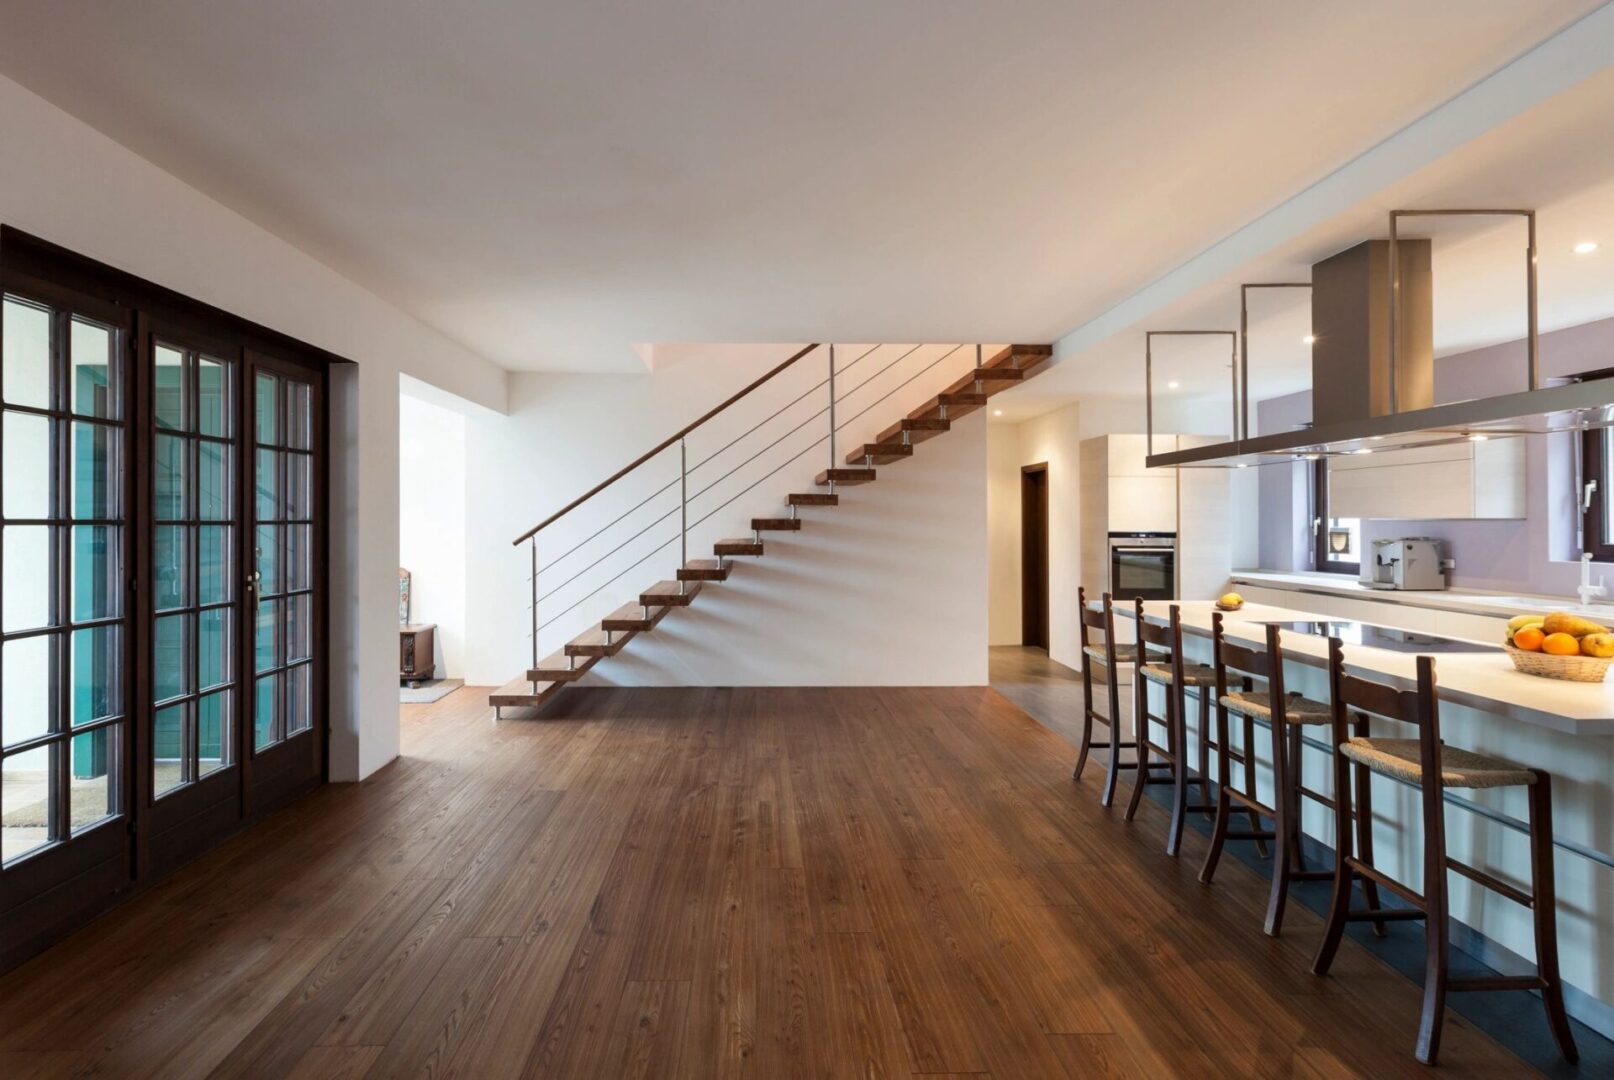 A room with wooden floors and stairs leading to the second floor.